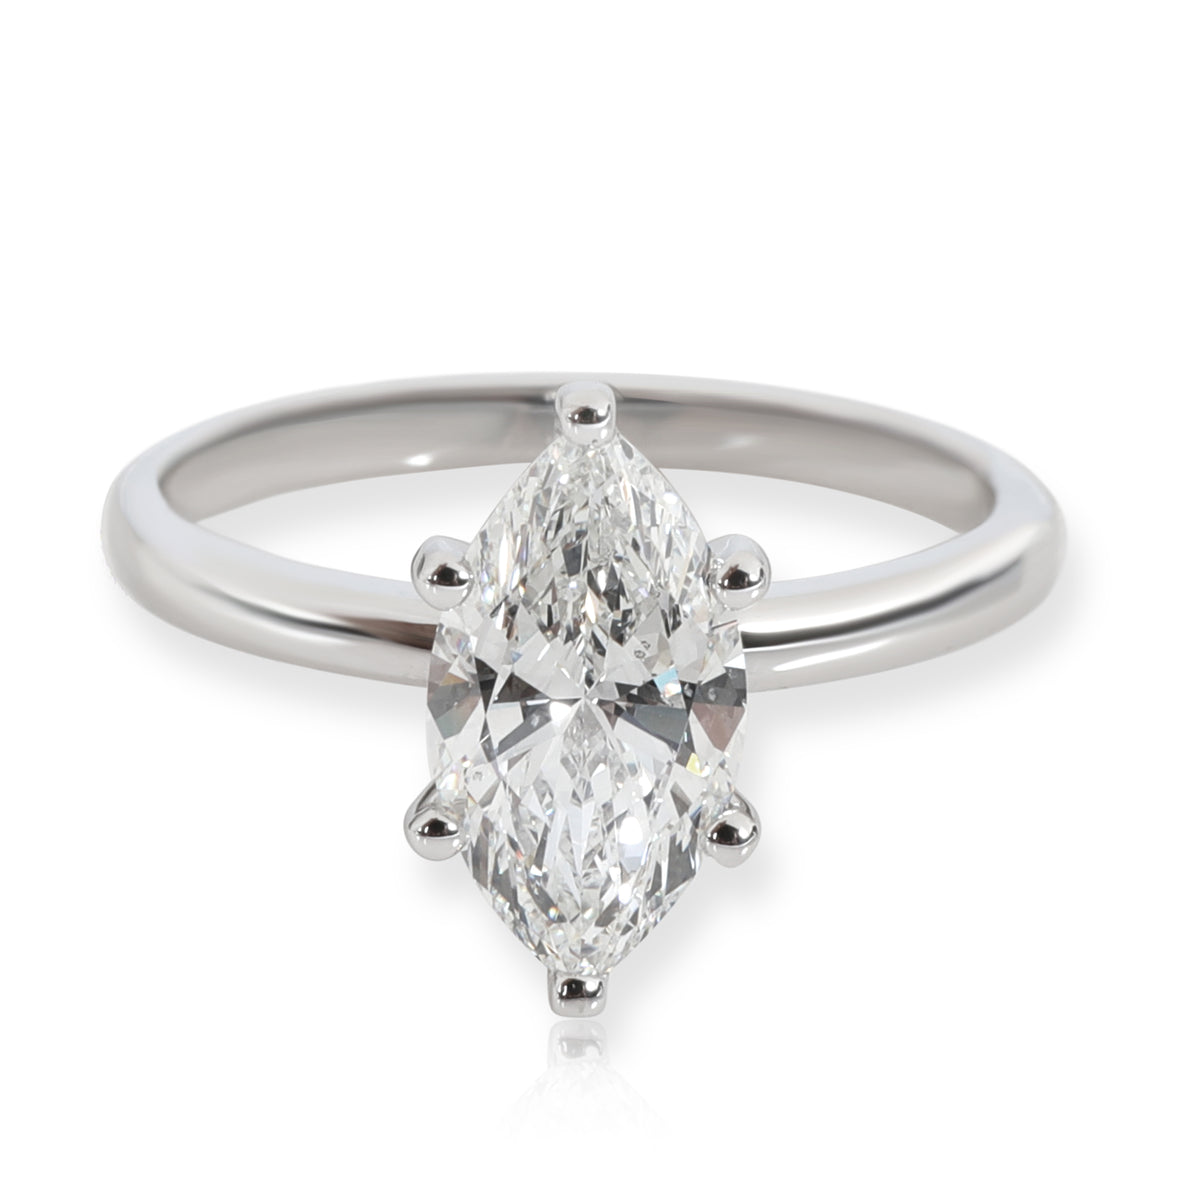 James Allen Marquise Diamond Solitaire Platinum Ring GIA Certified F SI1 1.7 CTW